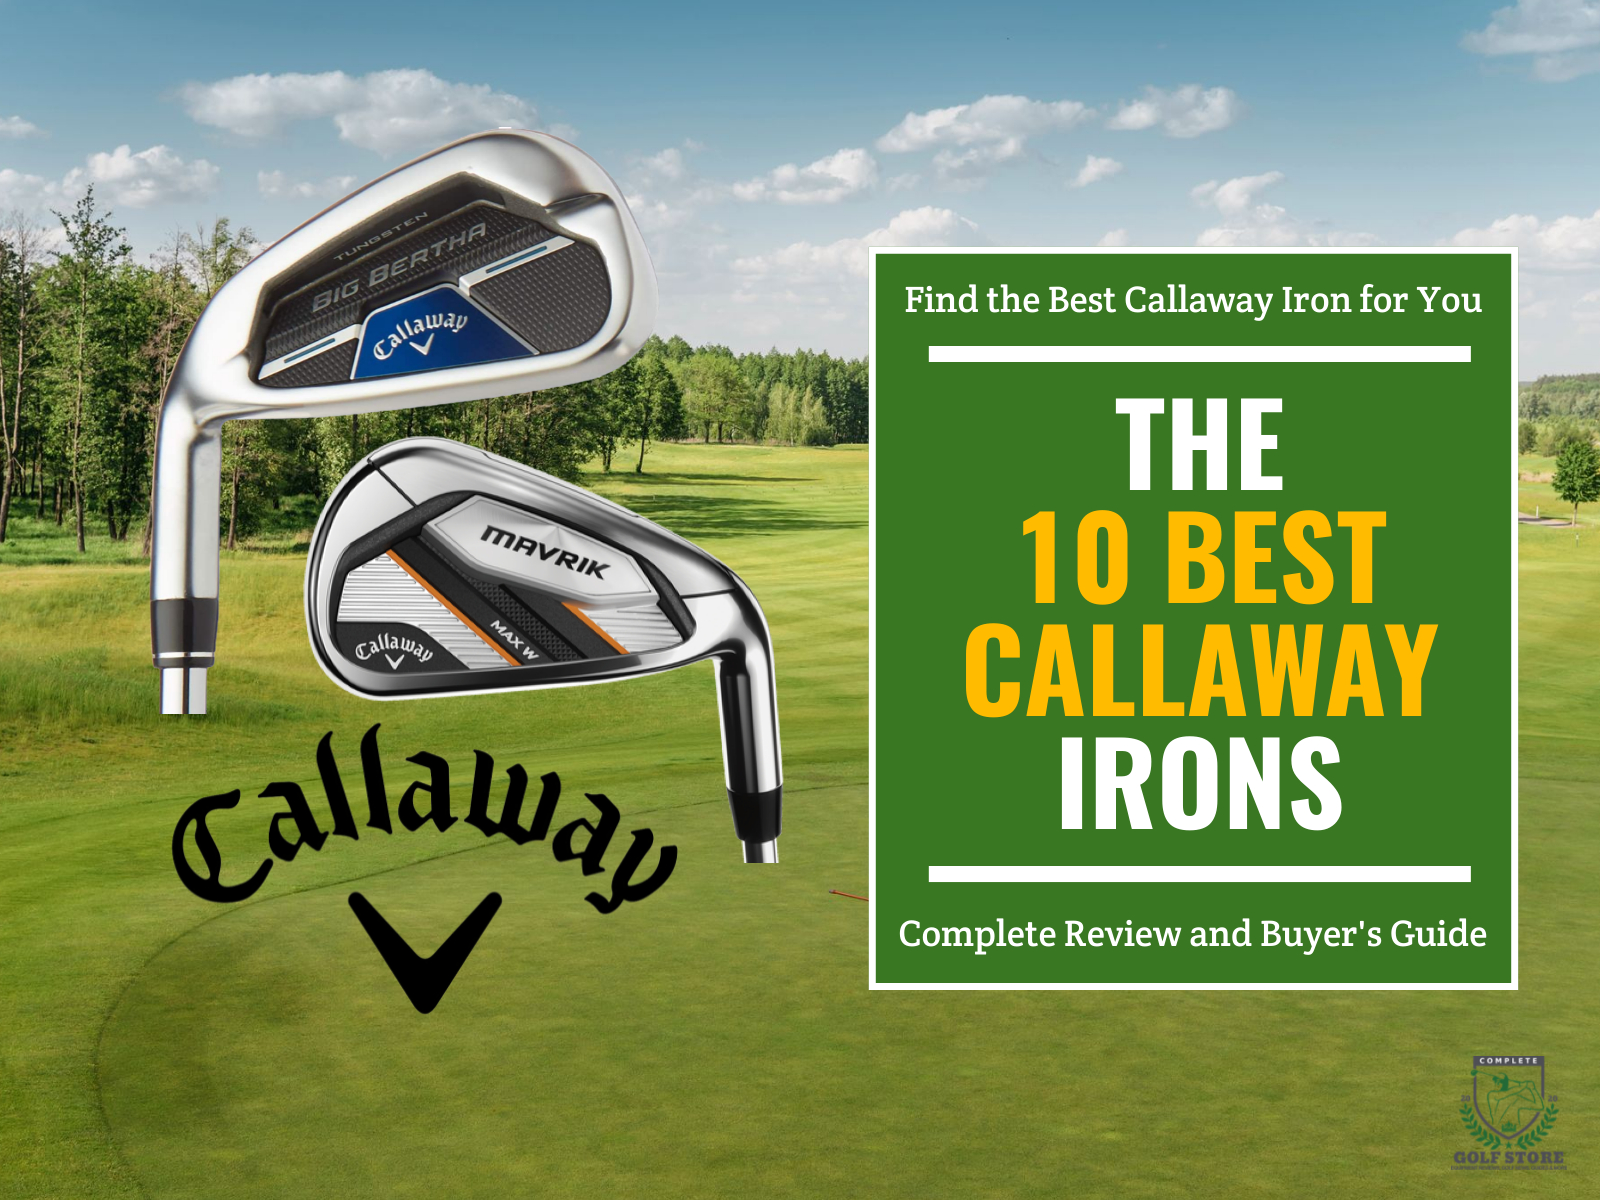 Two Callaway Irons and its logo on top of a golf course background. Green text box on the right contains the text 